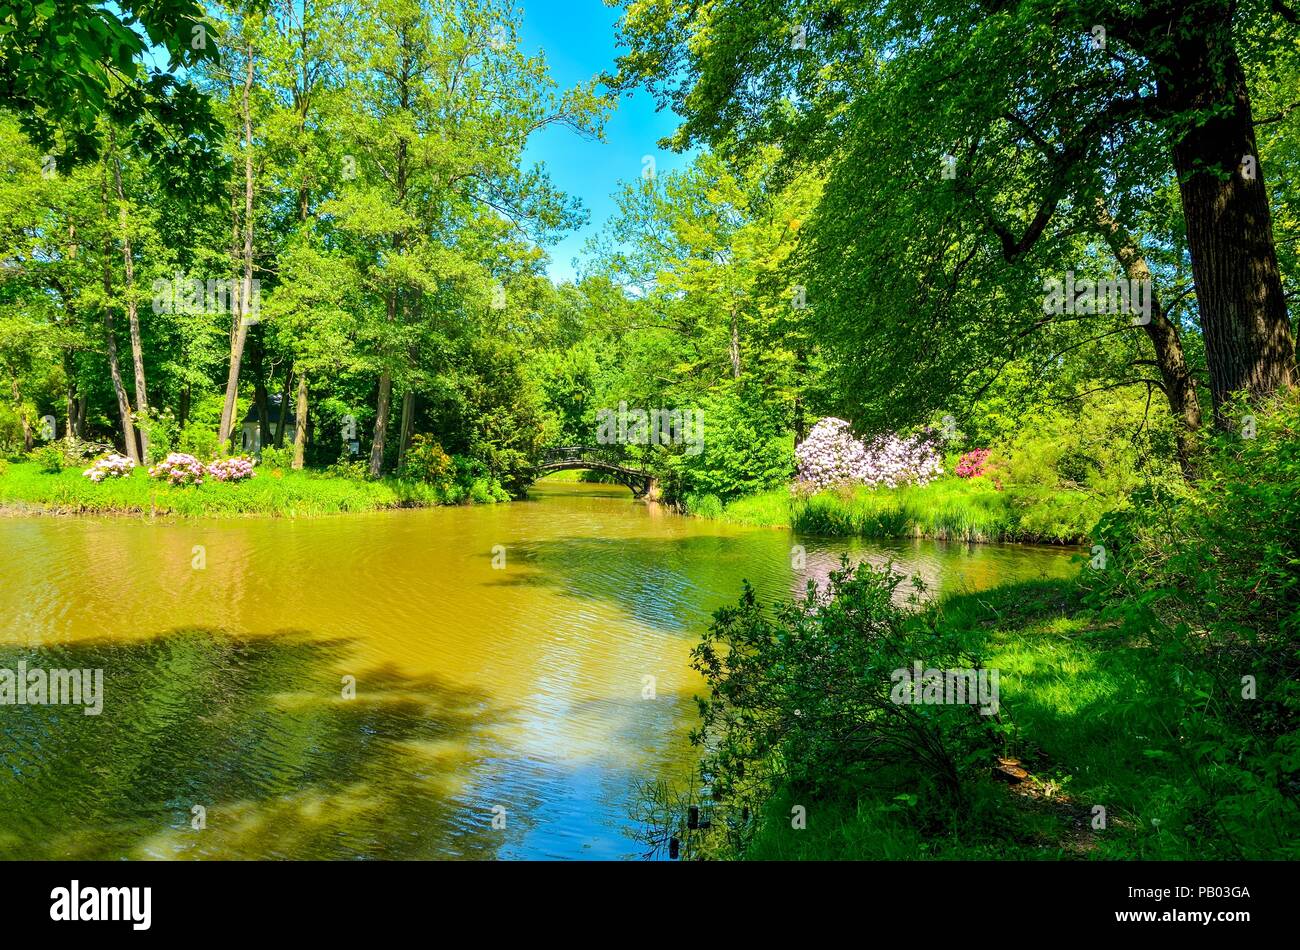 Beautiful green spring park. Bridge and flowers in the park. Stock Photo